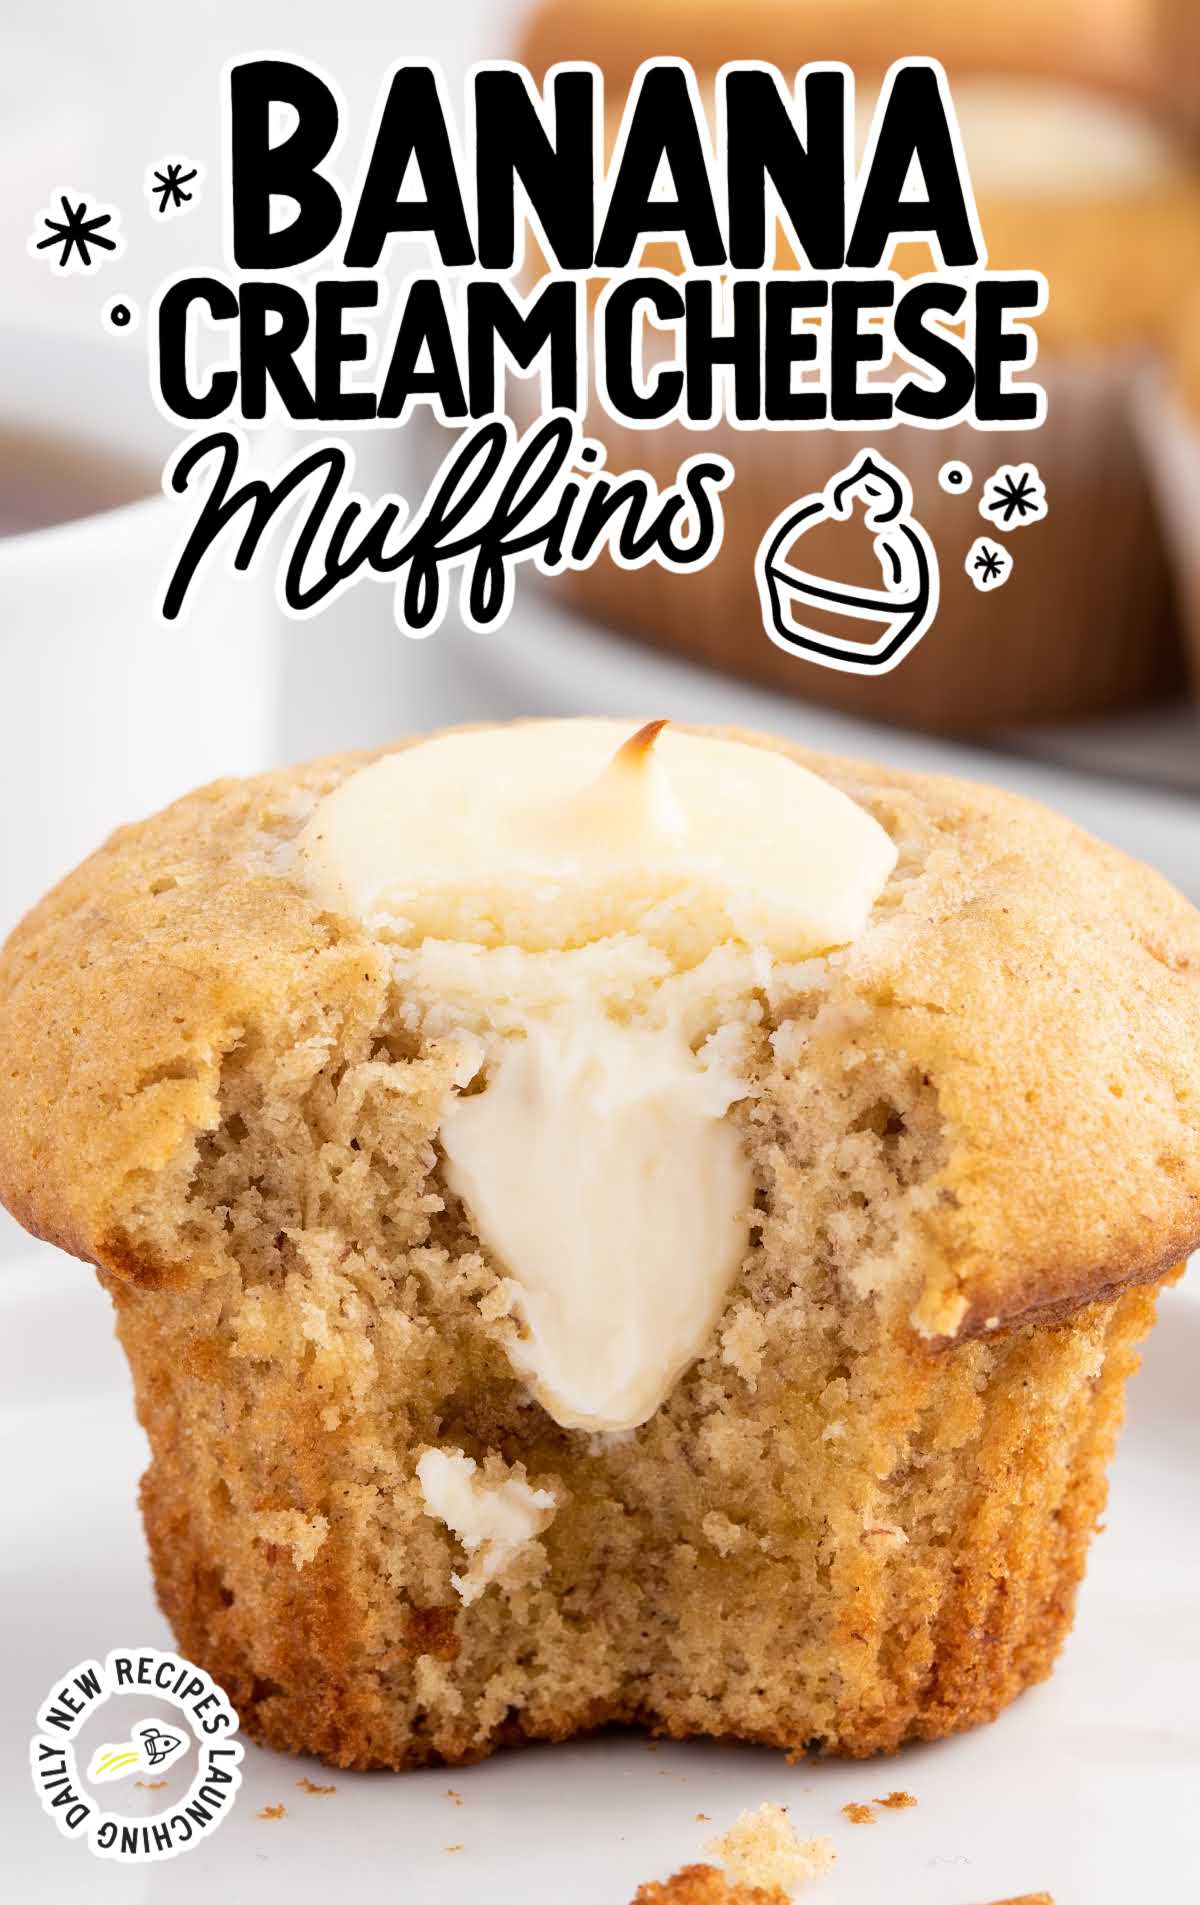 a close up shot of a Banana Cream Cheese Muffin with a bite taken out of it